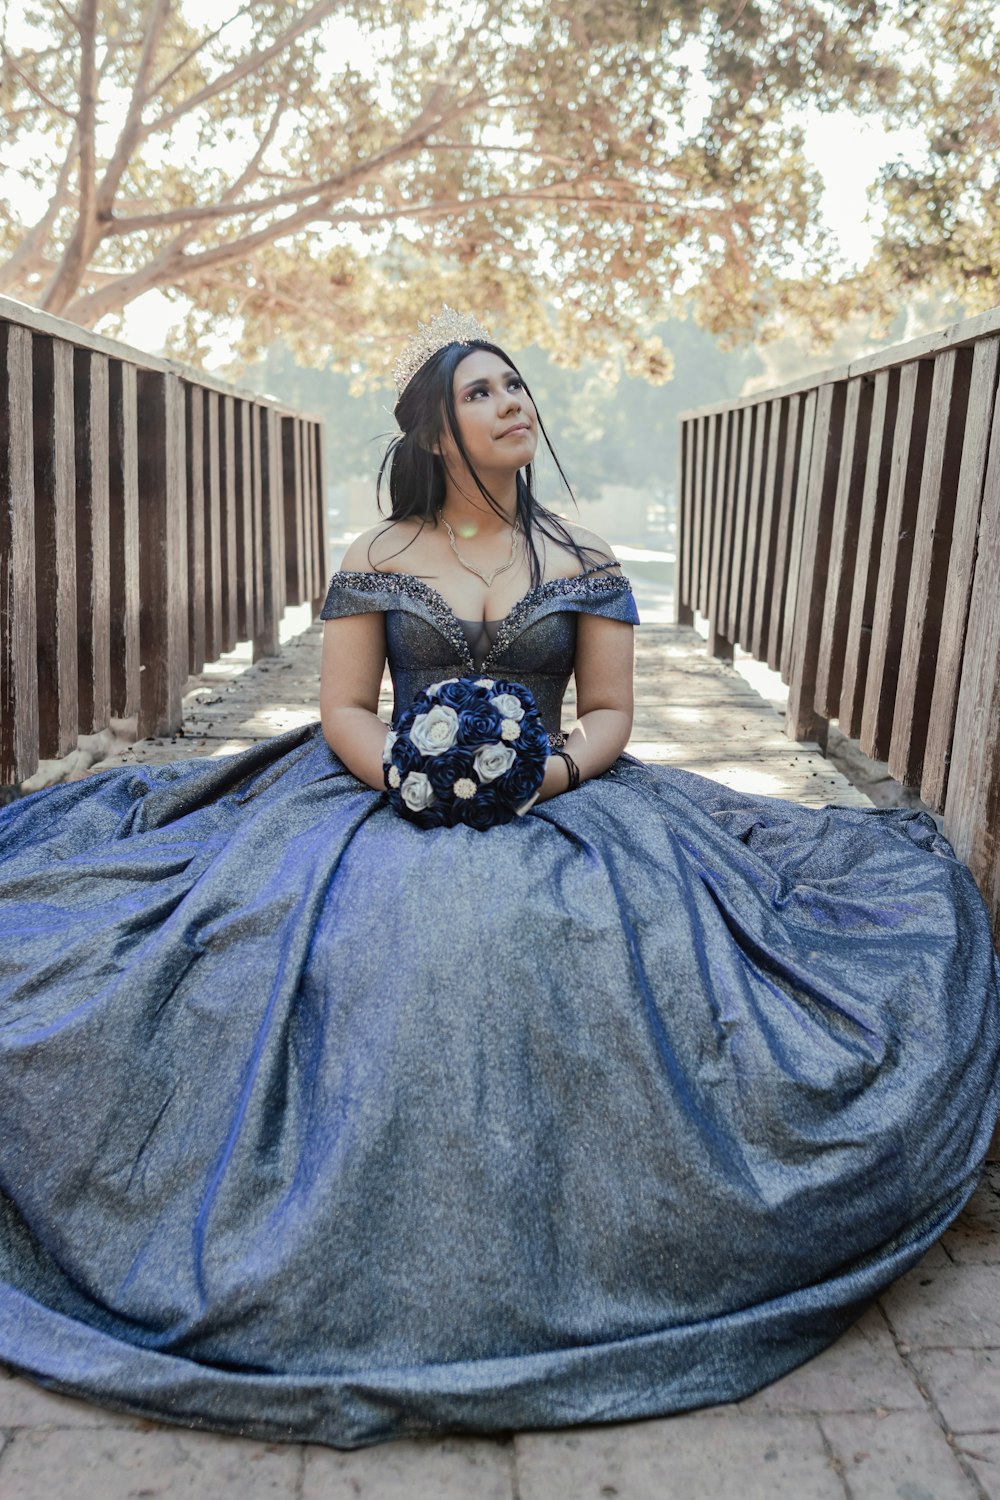 a woman in a blue dress sitting on a wooden bench